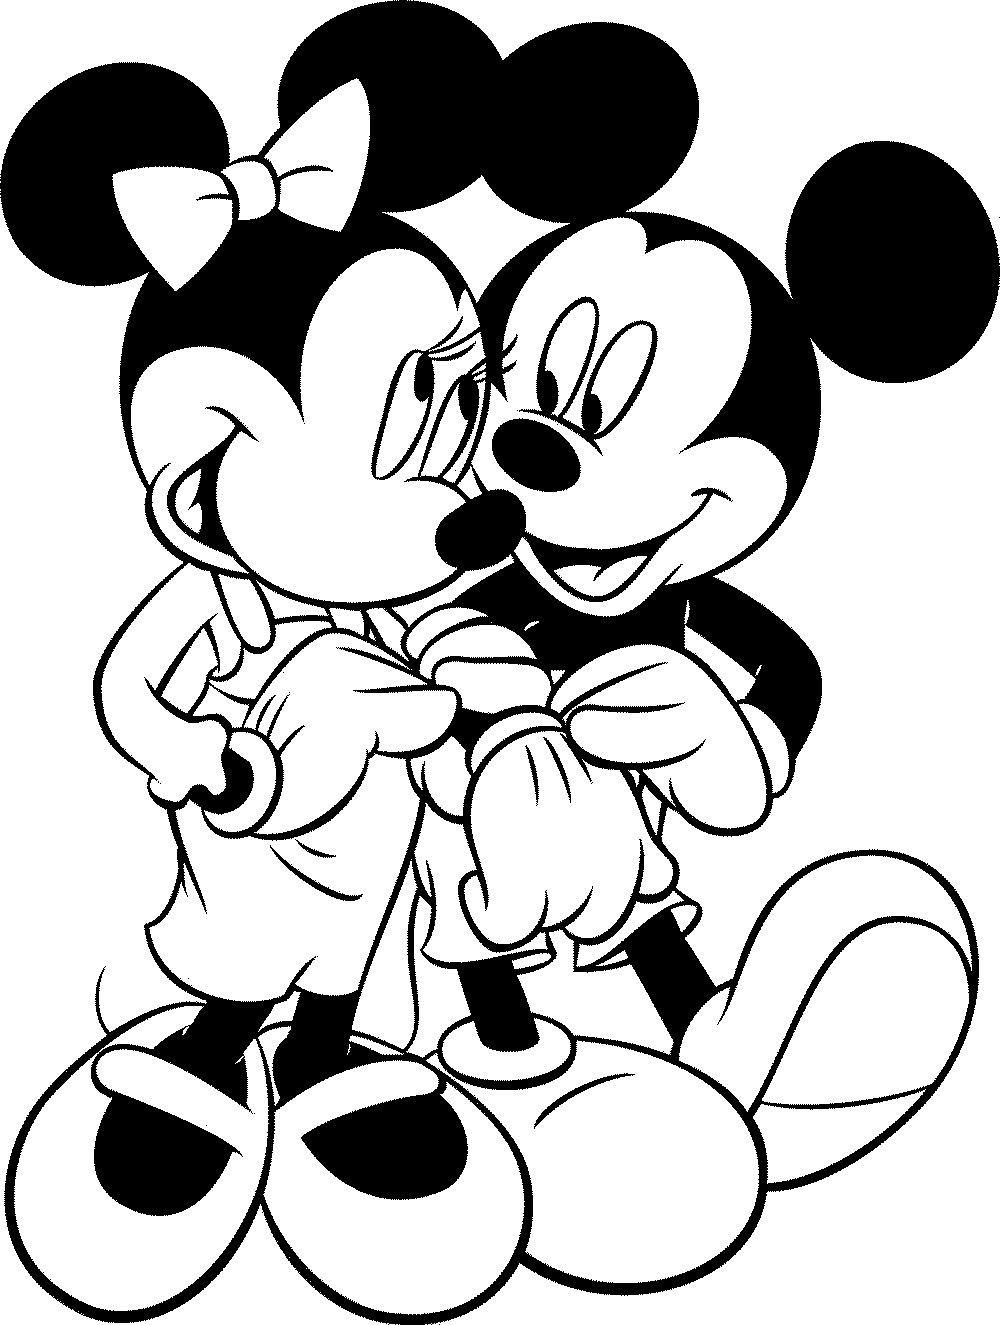 Mickey Mouse Coloring Page Coloring Pages Perfect Concept Mickey Mouse Coloring Pages Free